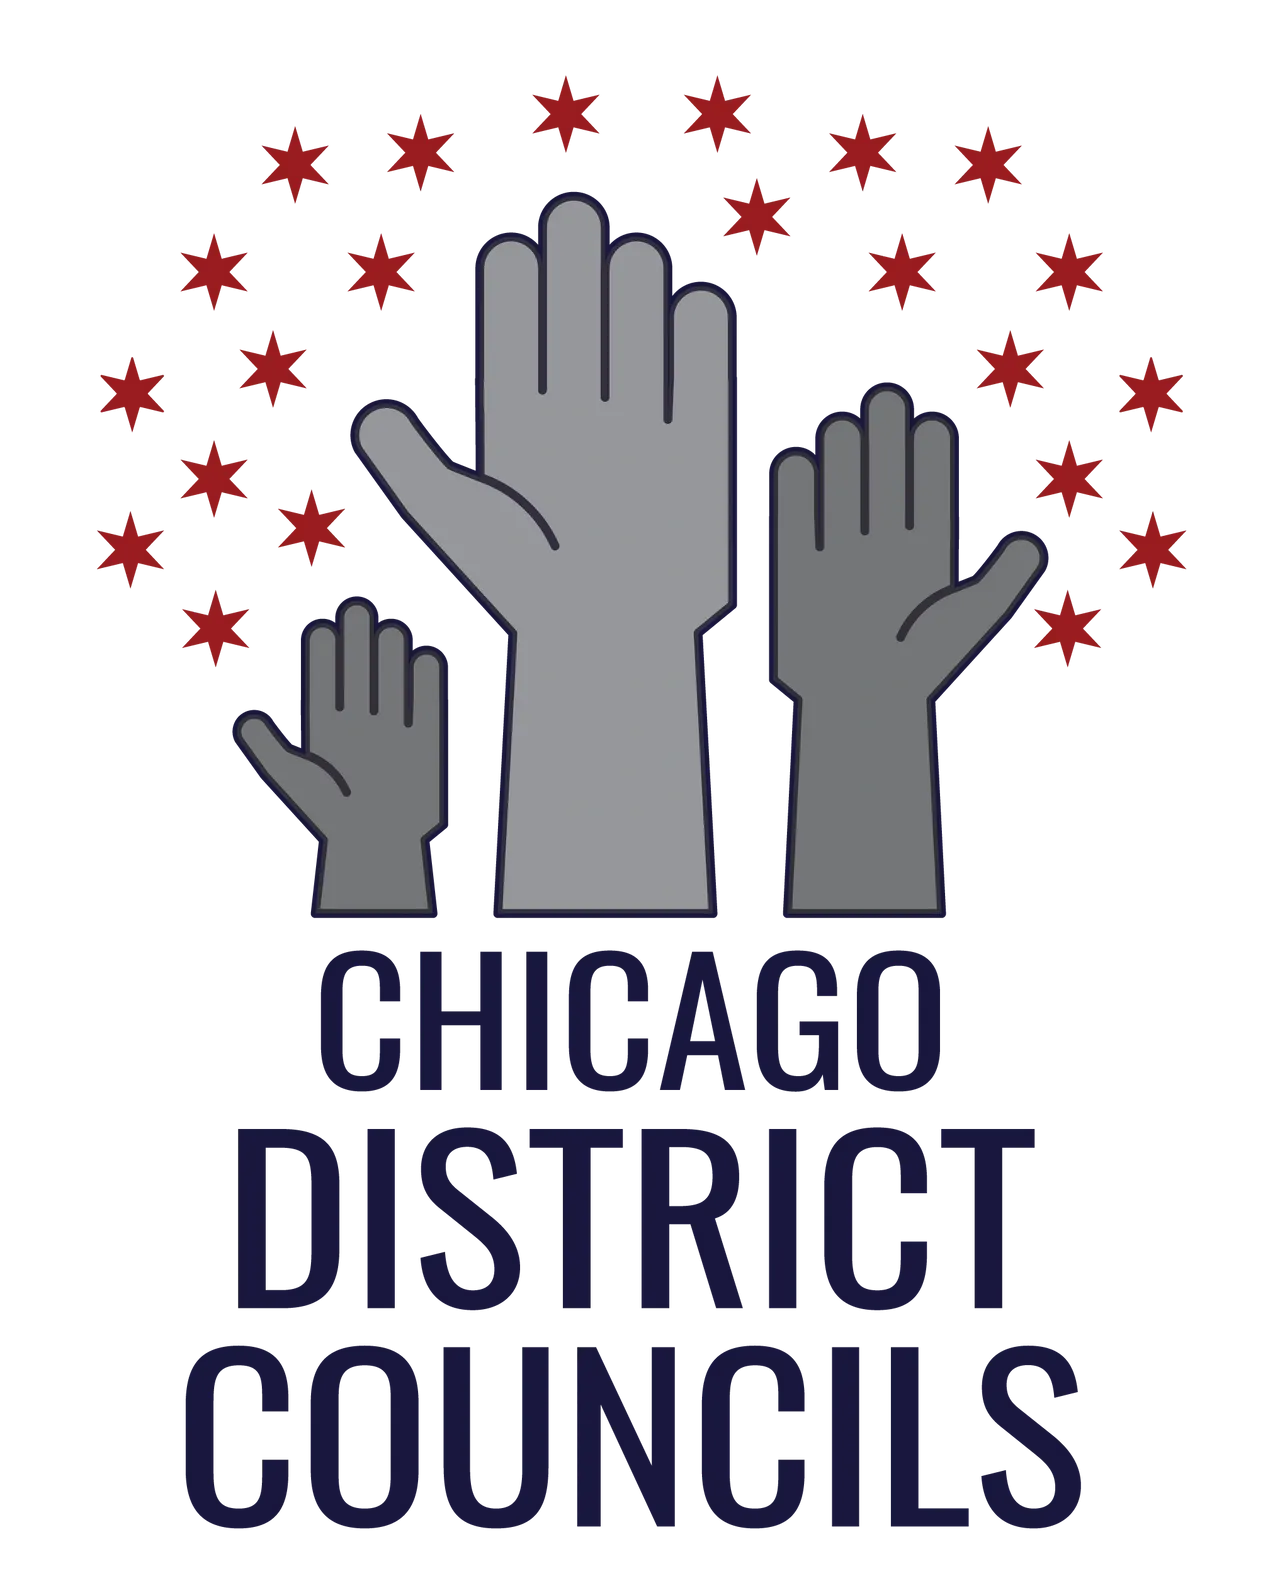 Three hands reach up to red stars with the text "CHICAGO DISTRICT COUNCILS"